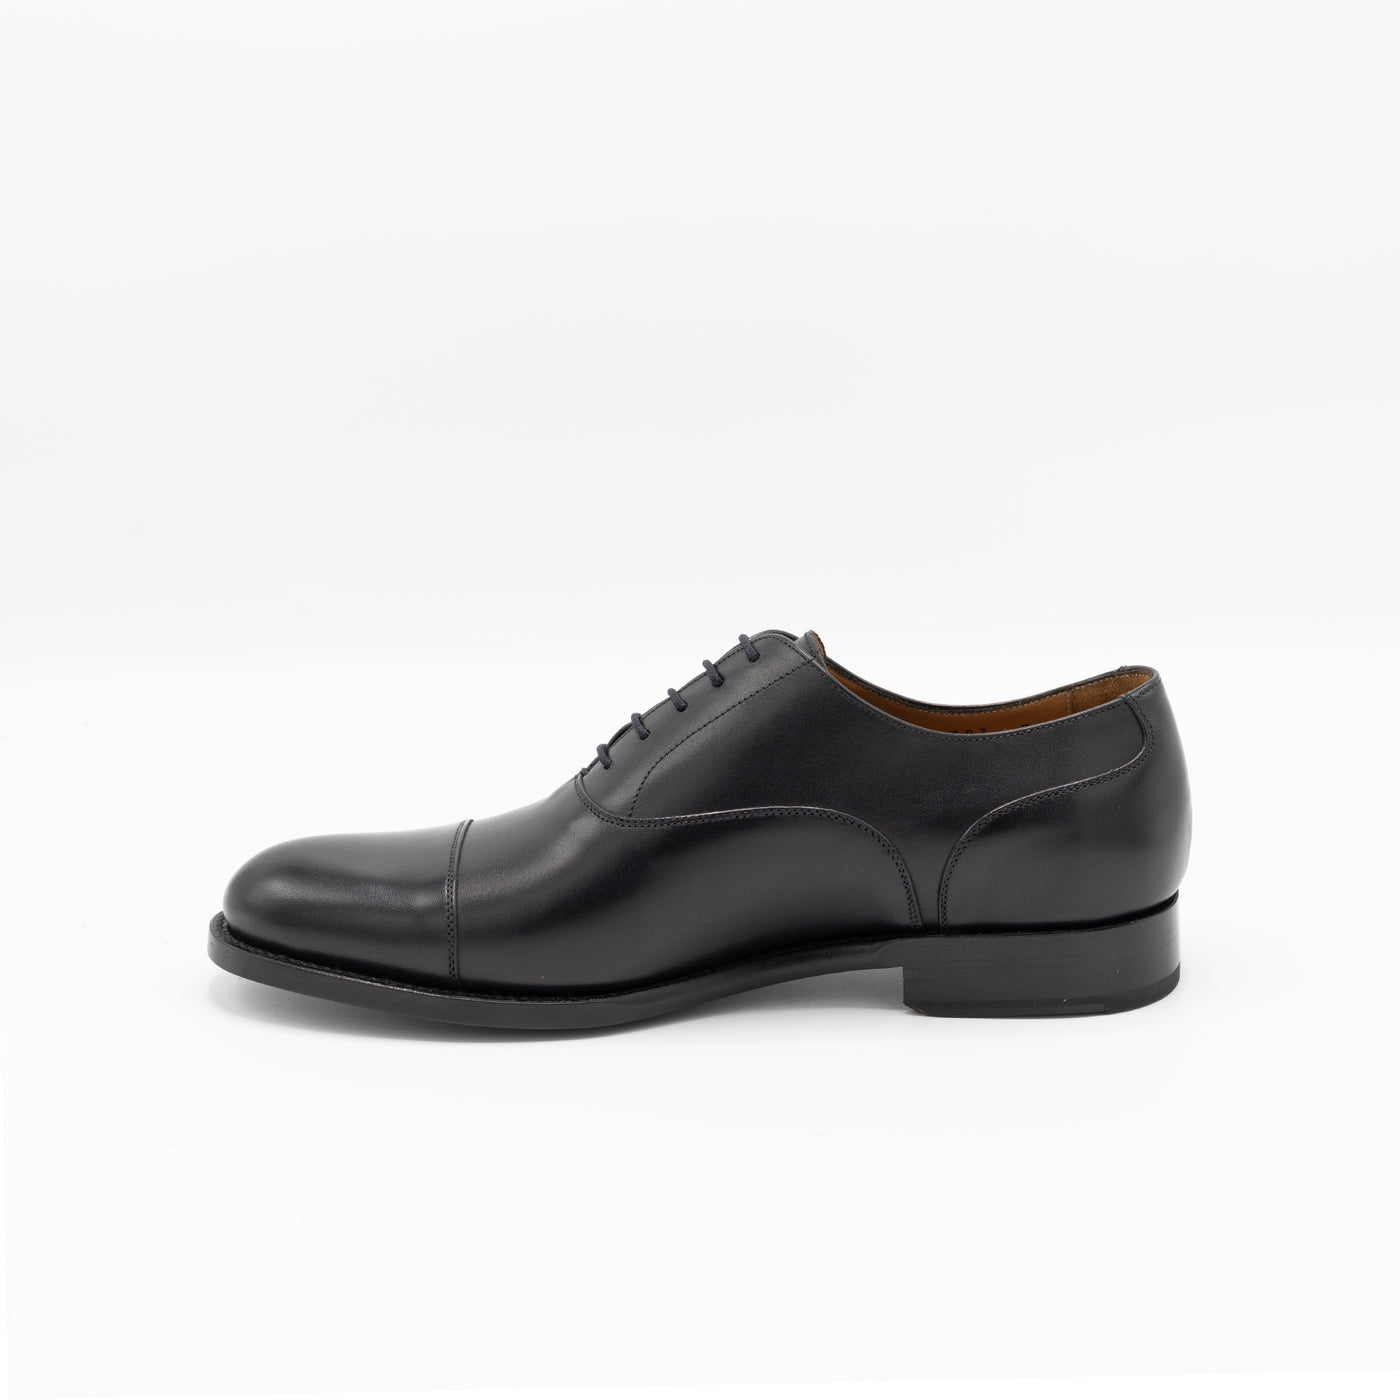 Derby with Cap-toe in Black Leather